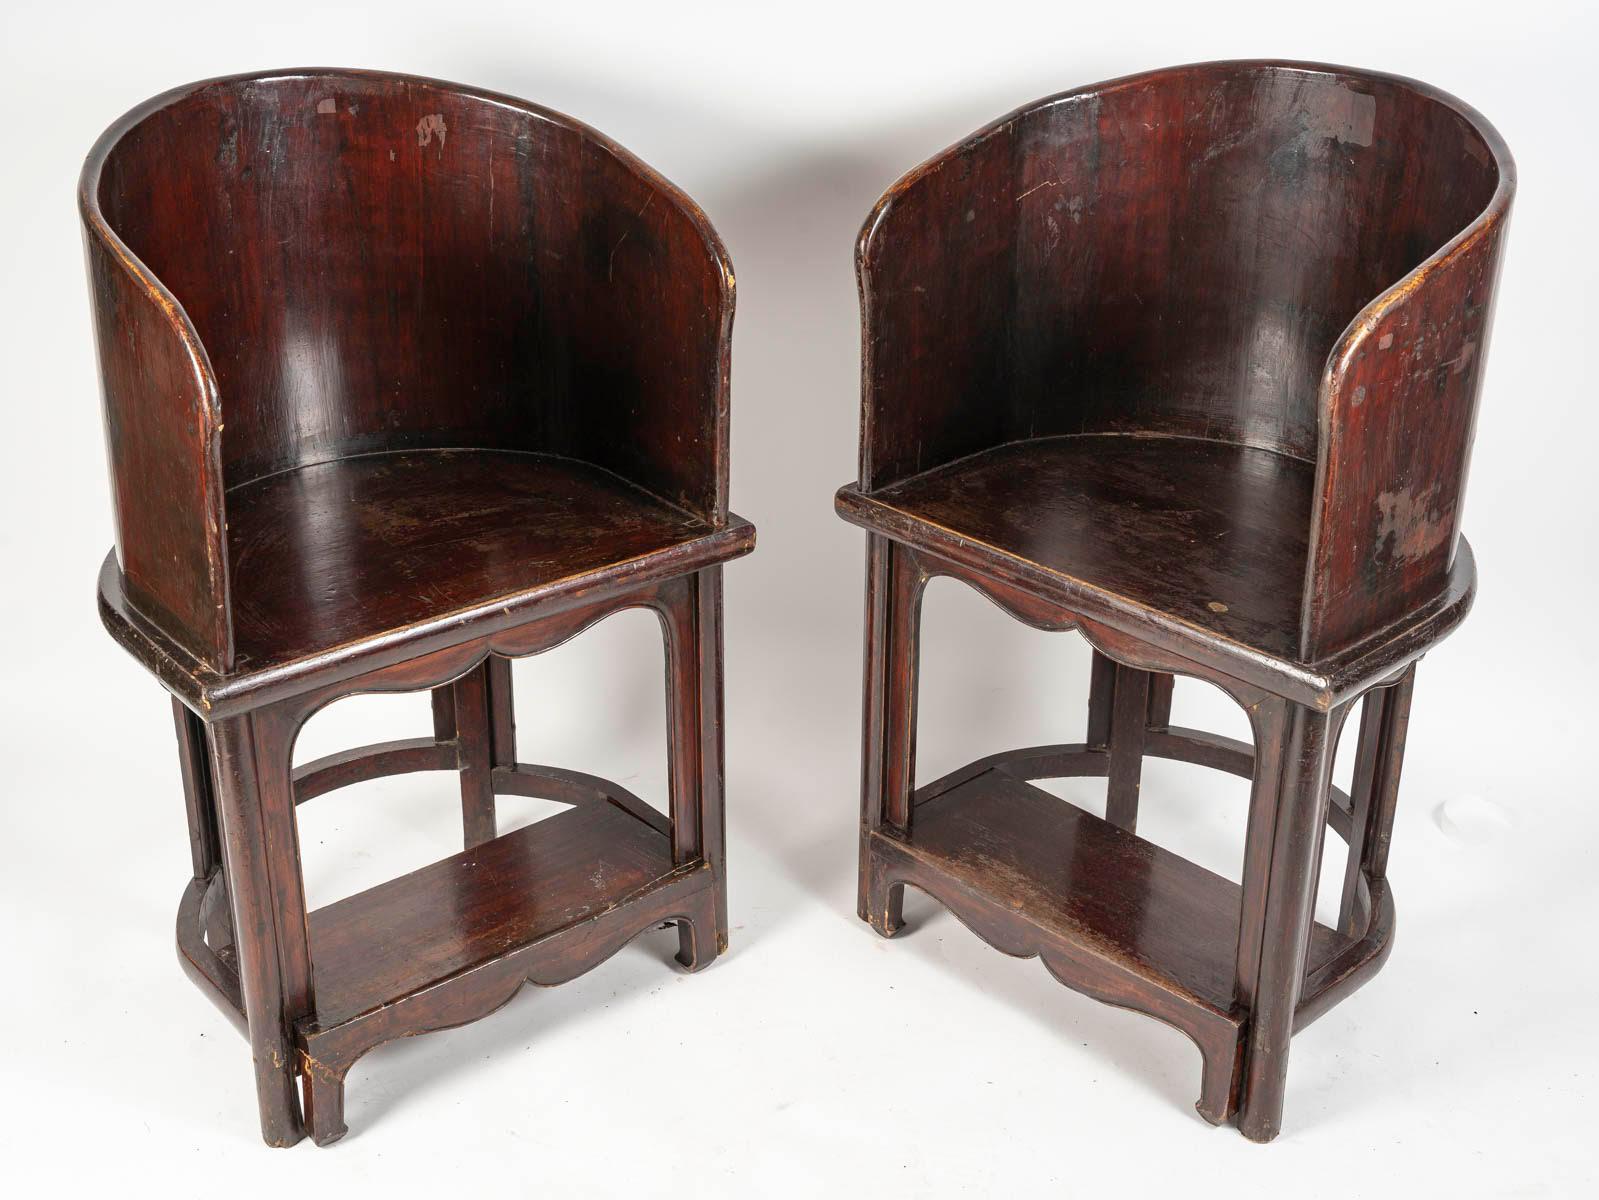 Pair of Art of Asia wooden dignitary armchairs with footrests.

Pair of early 20th century Art of Asia wooden dignitary armchairs with retractable footrests.
h: 100cm, w: 58cm, d: 50cm